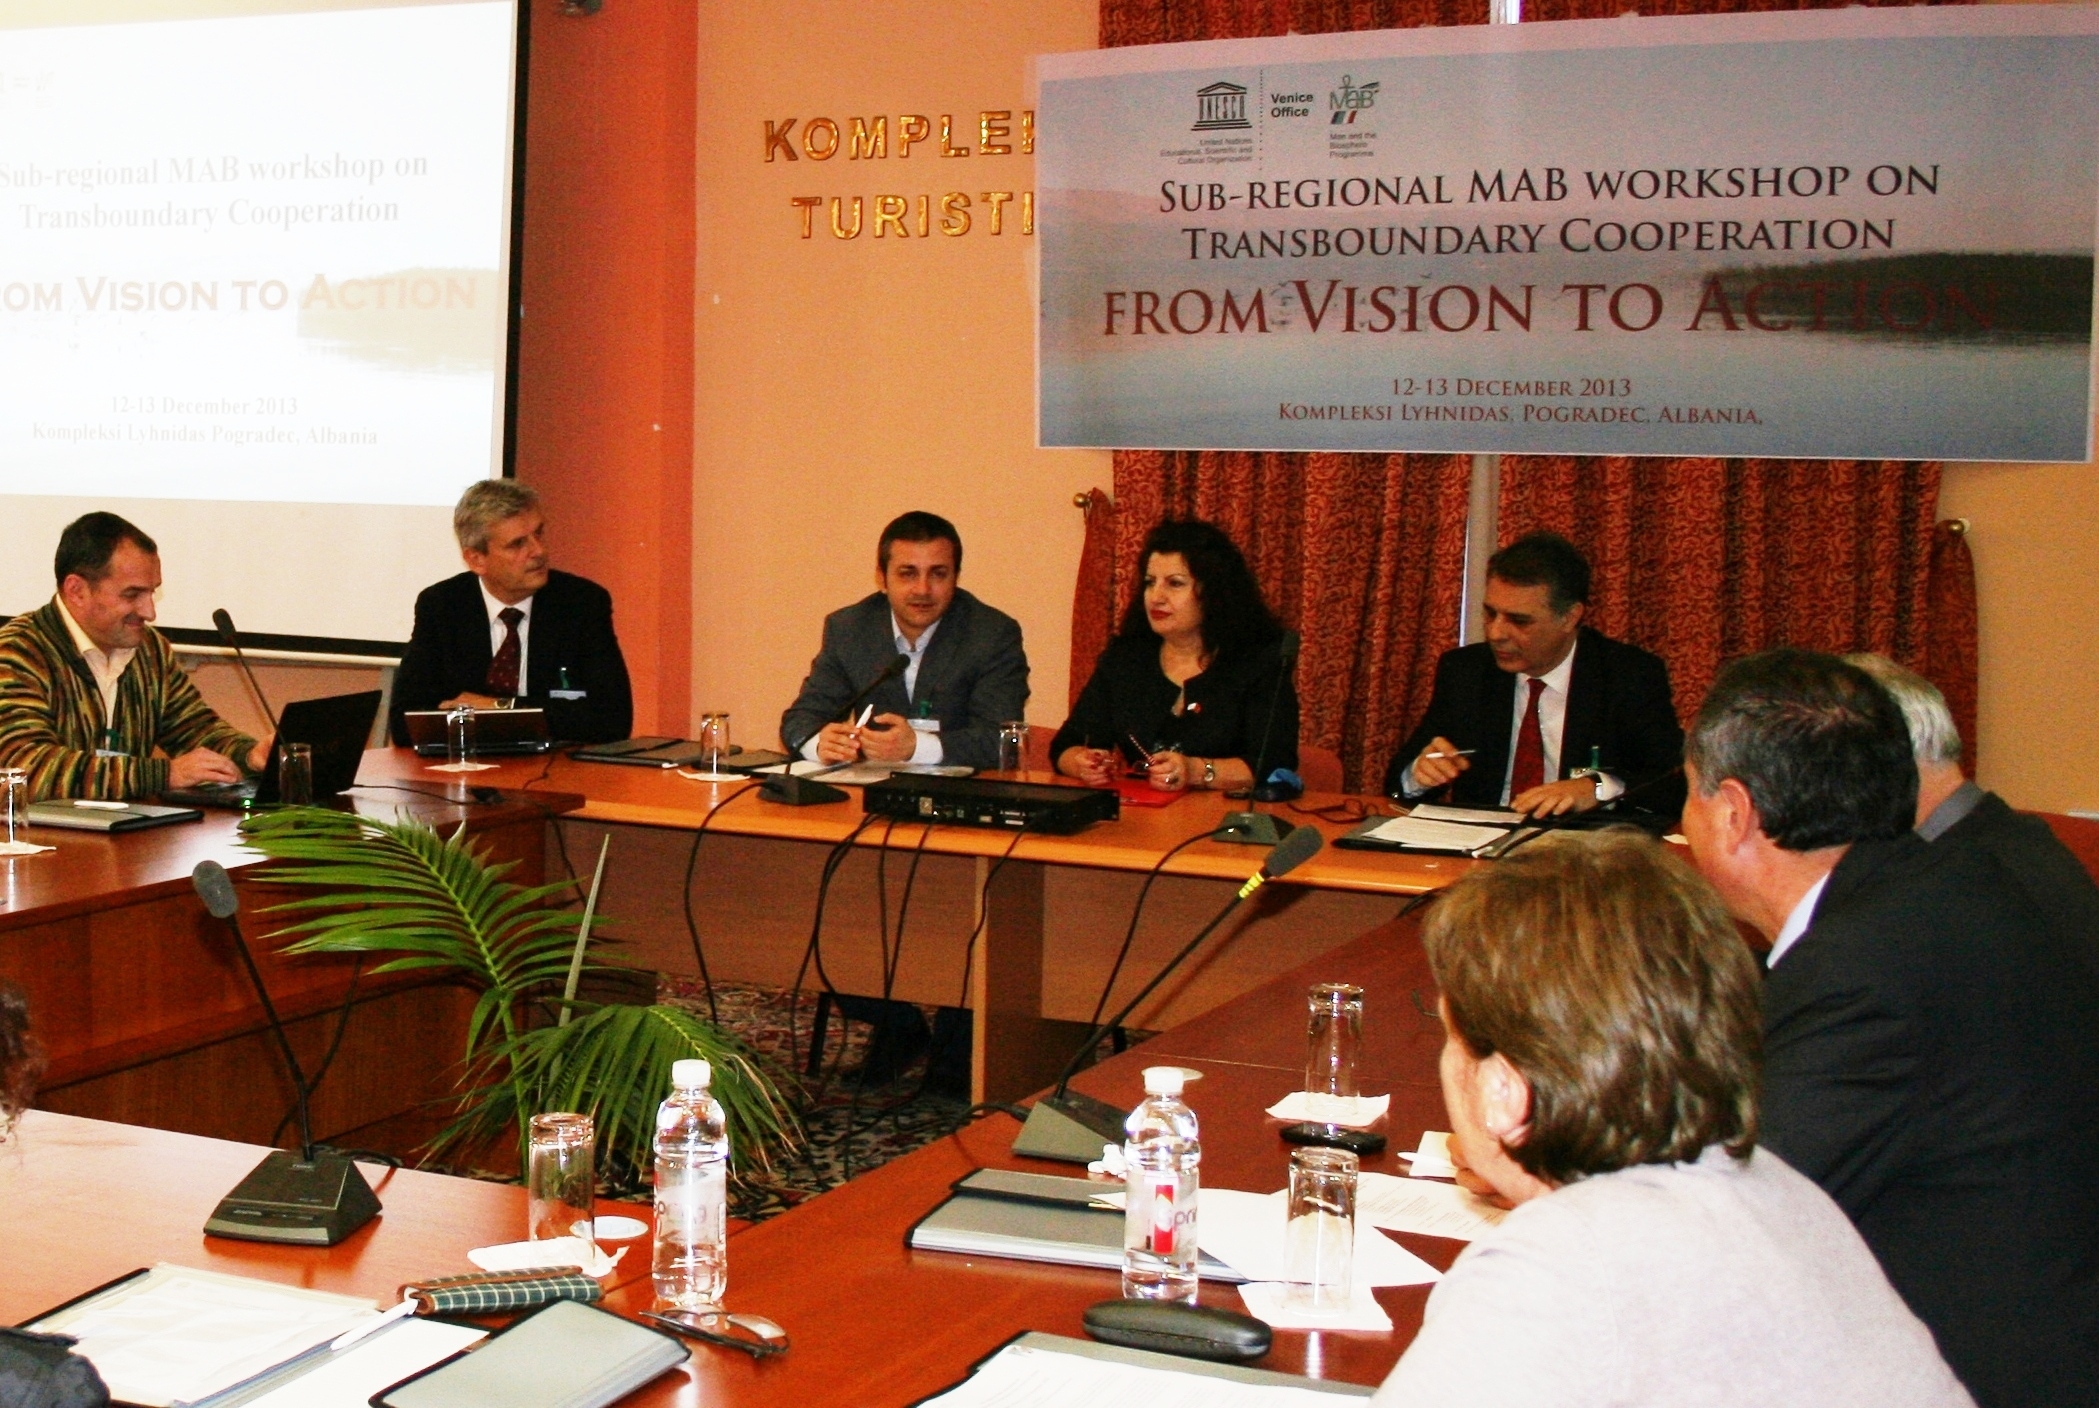 Sub-regional MAB workshop on Transboundary Cooperation: from Vision to Action